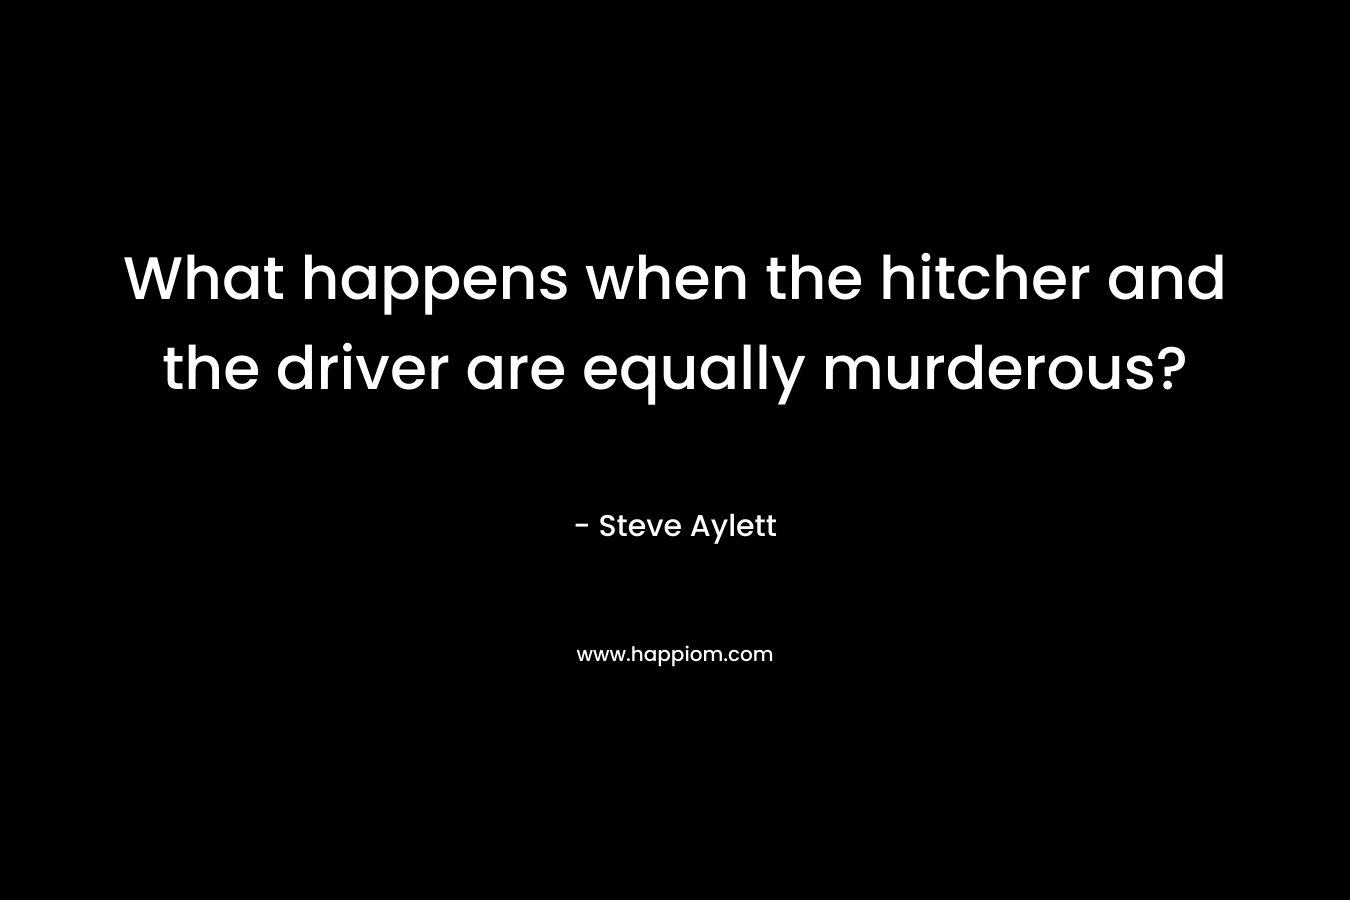 What happens when the hitcher and the driver are equally murderous? – Steve Aylett